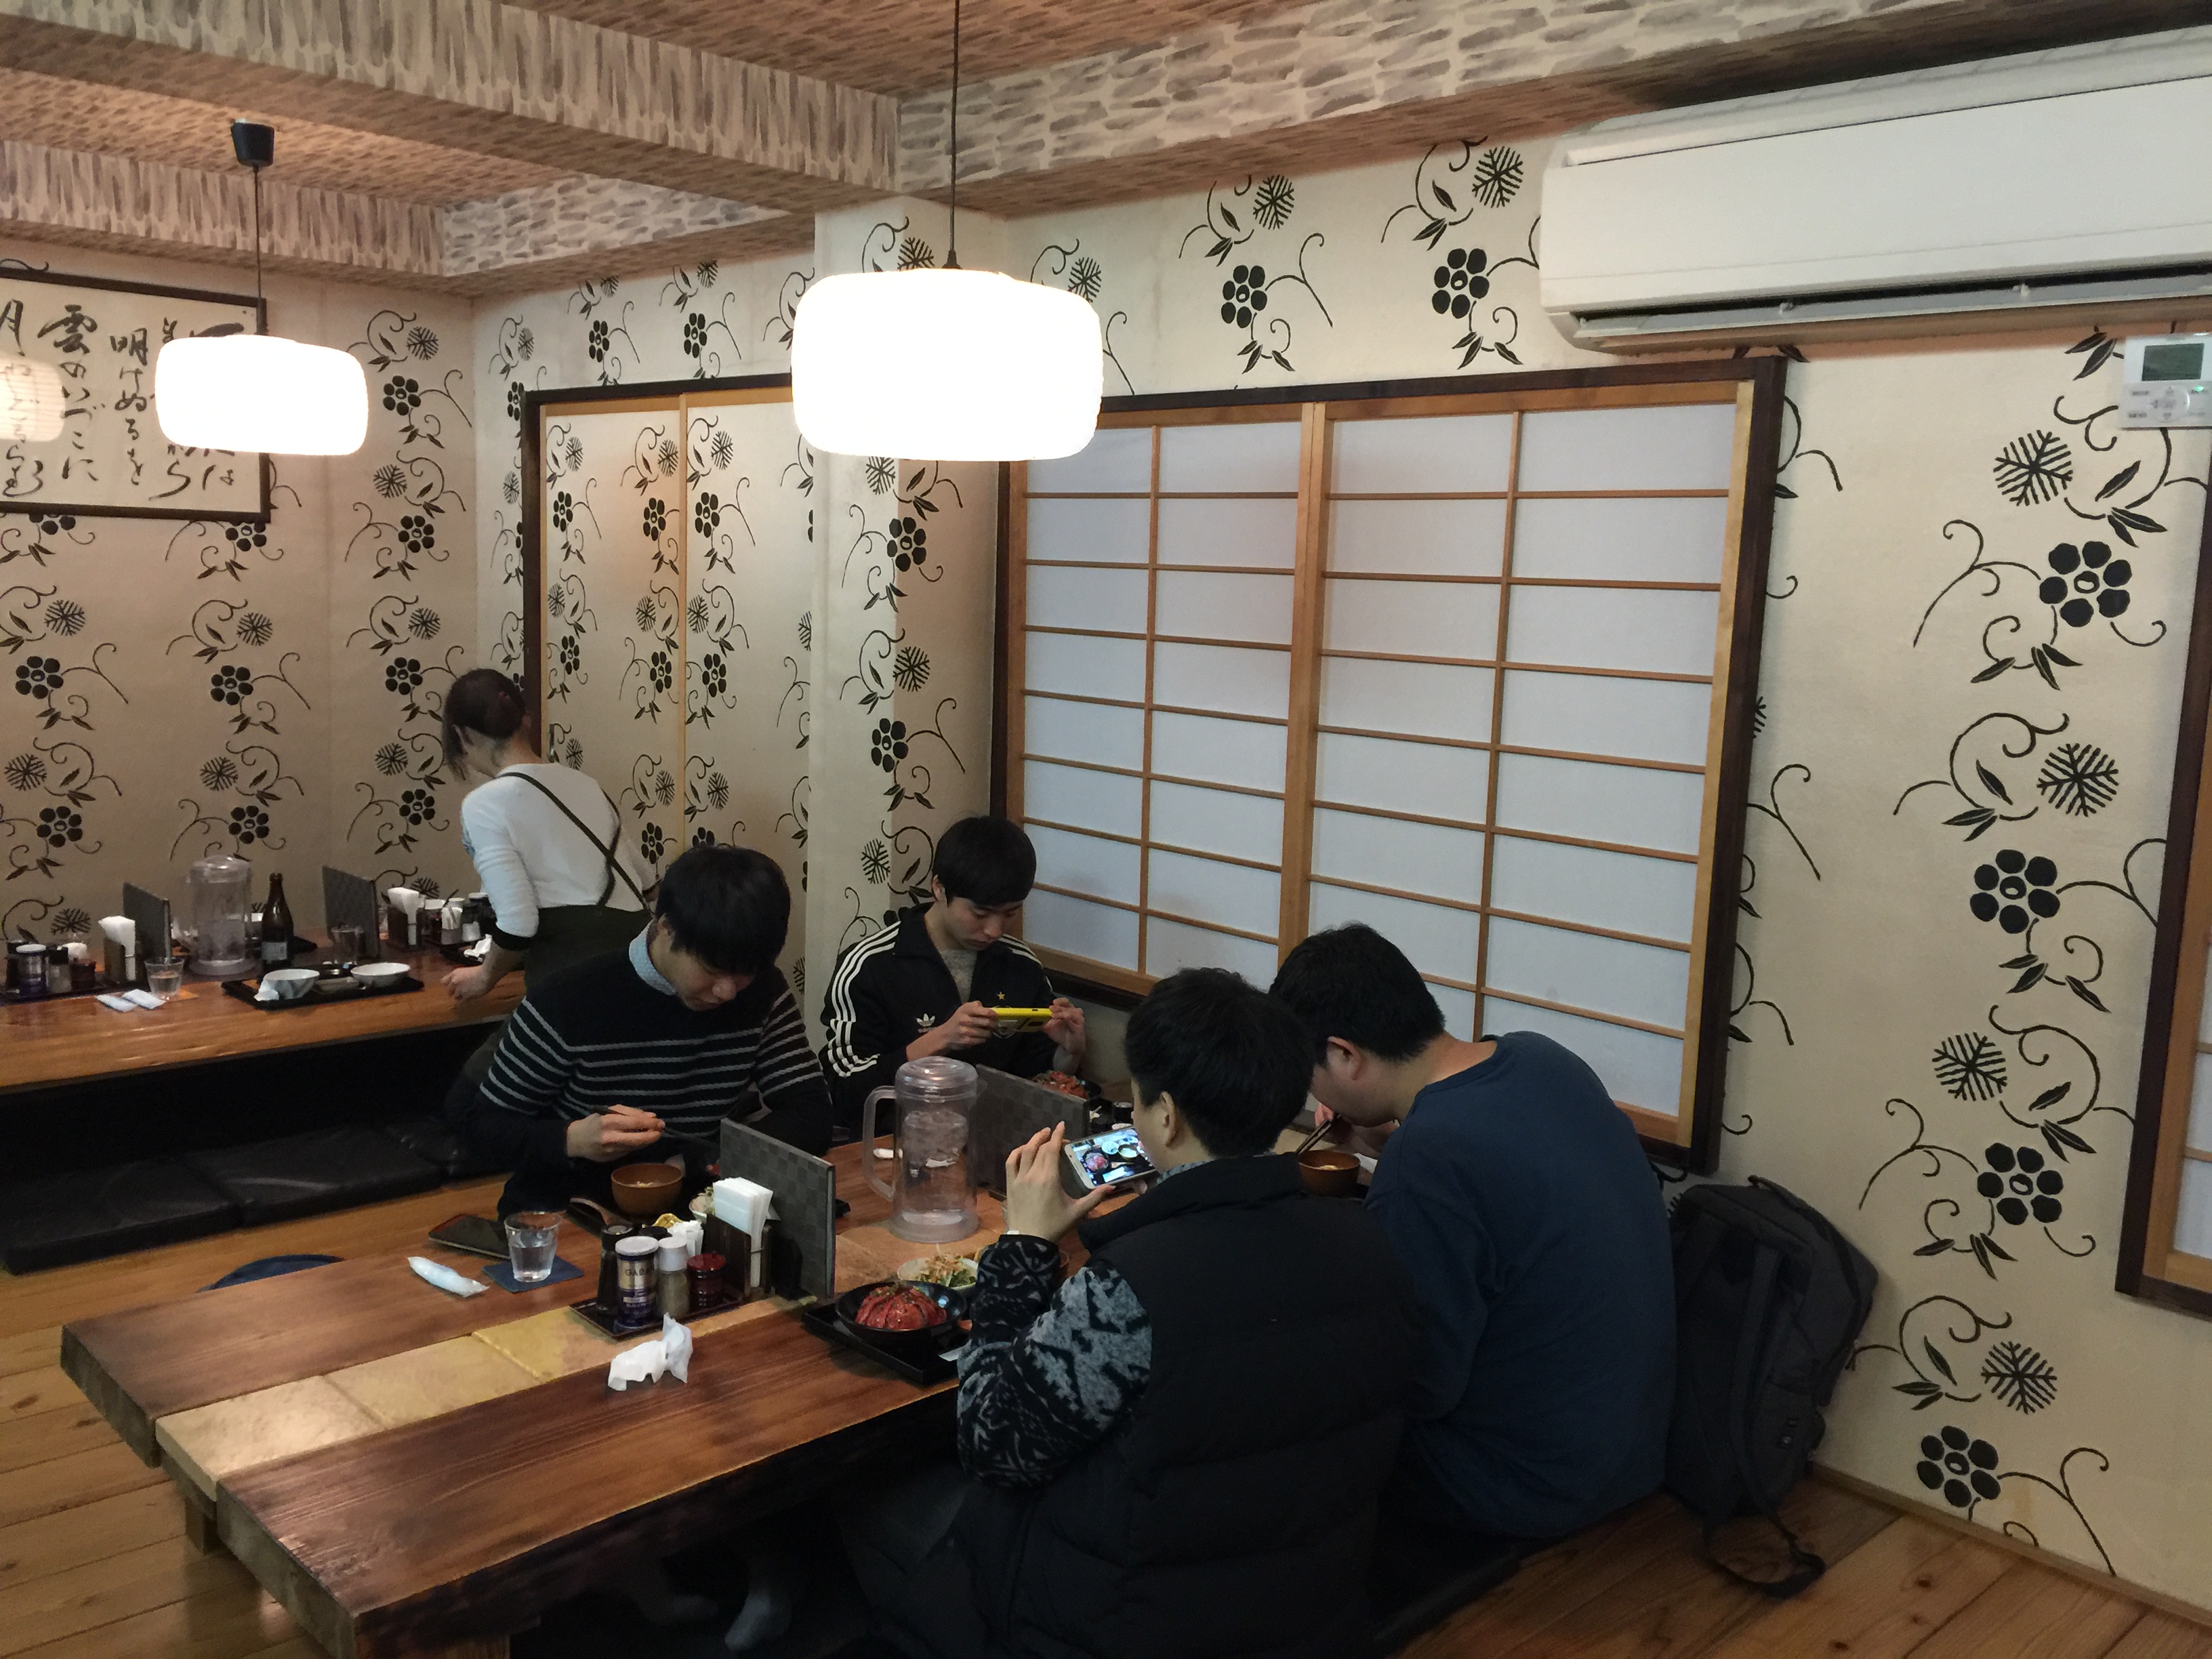 The main dining area has 3 tatami table that sits 6 people each